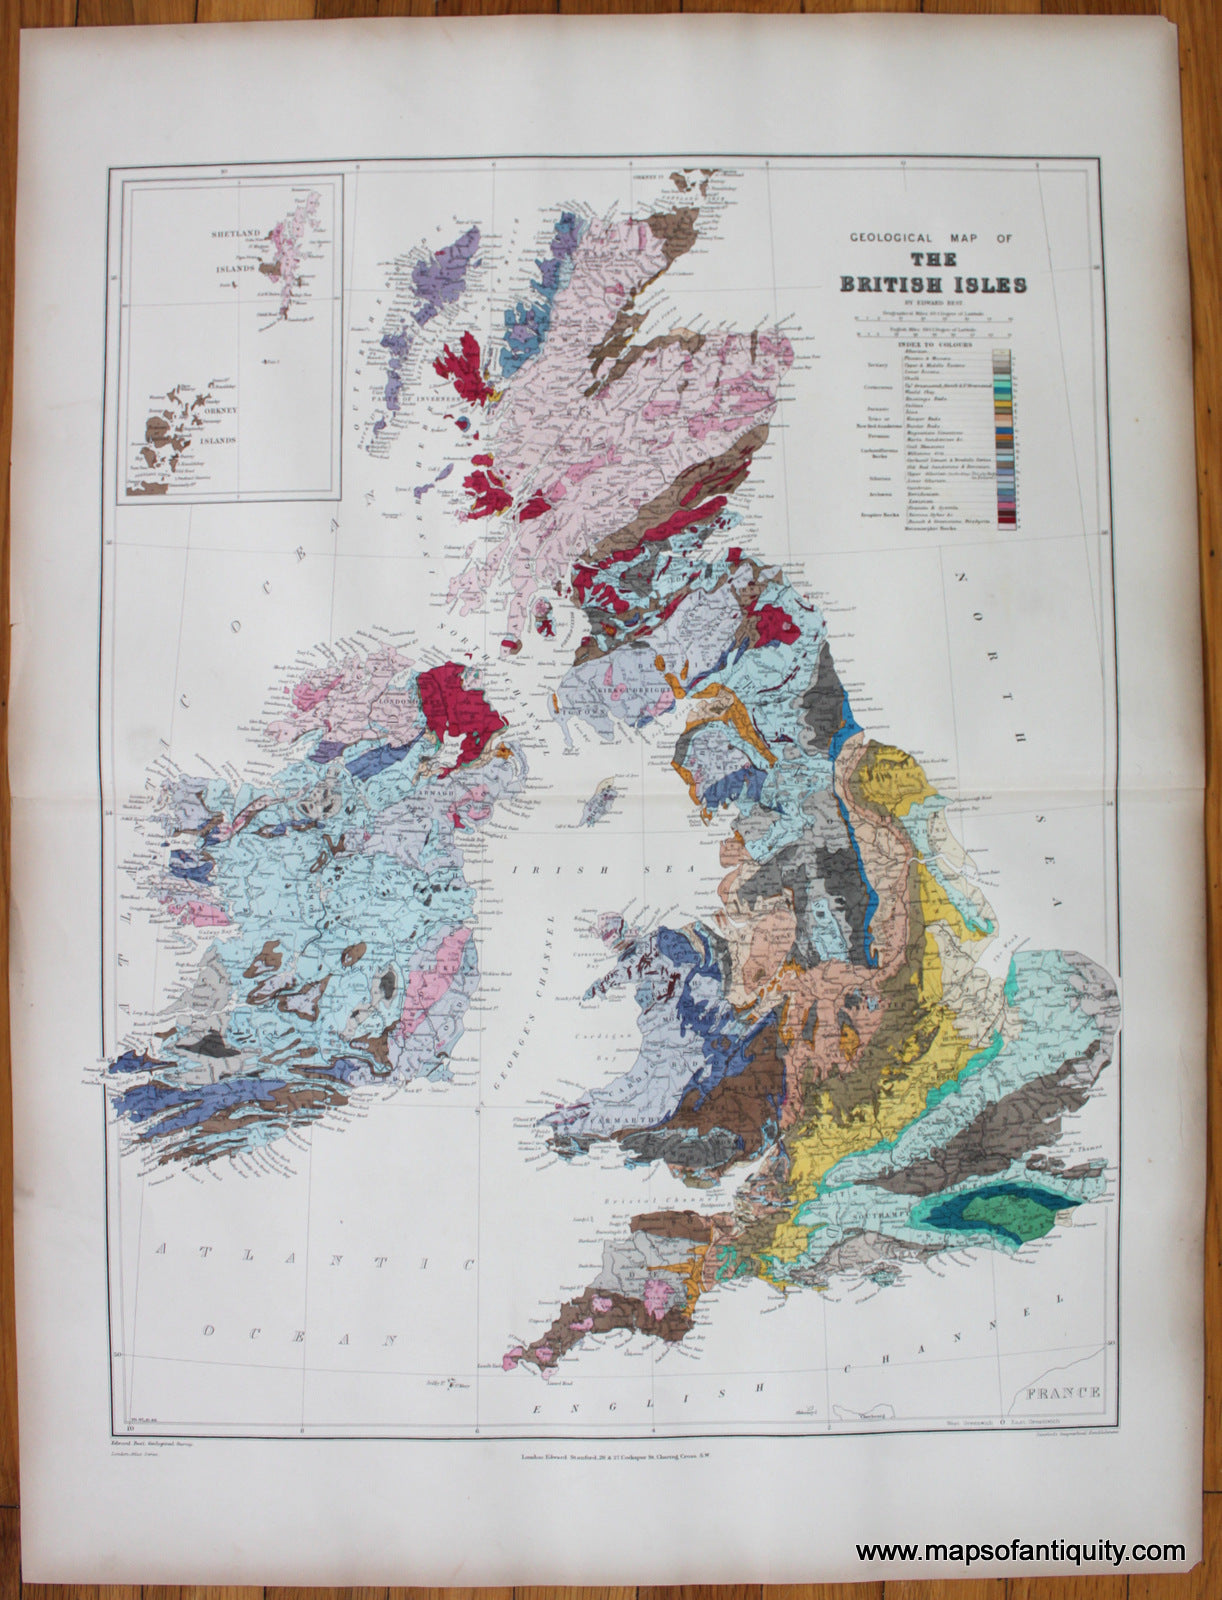 Antique-Geological-Map-of-the-British-Isles-Geology-Edward-Best-Stanford-1894-1890s-1800s-Late-19th-Century-Maps-of-Antiquity